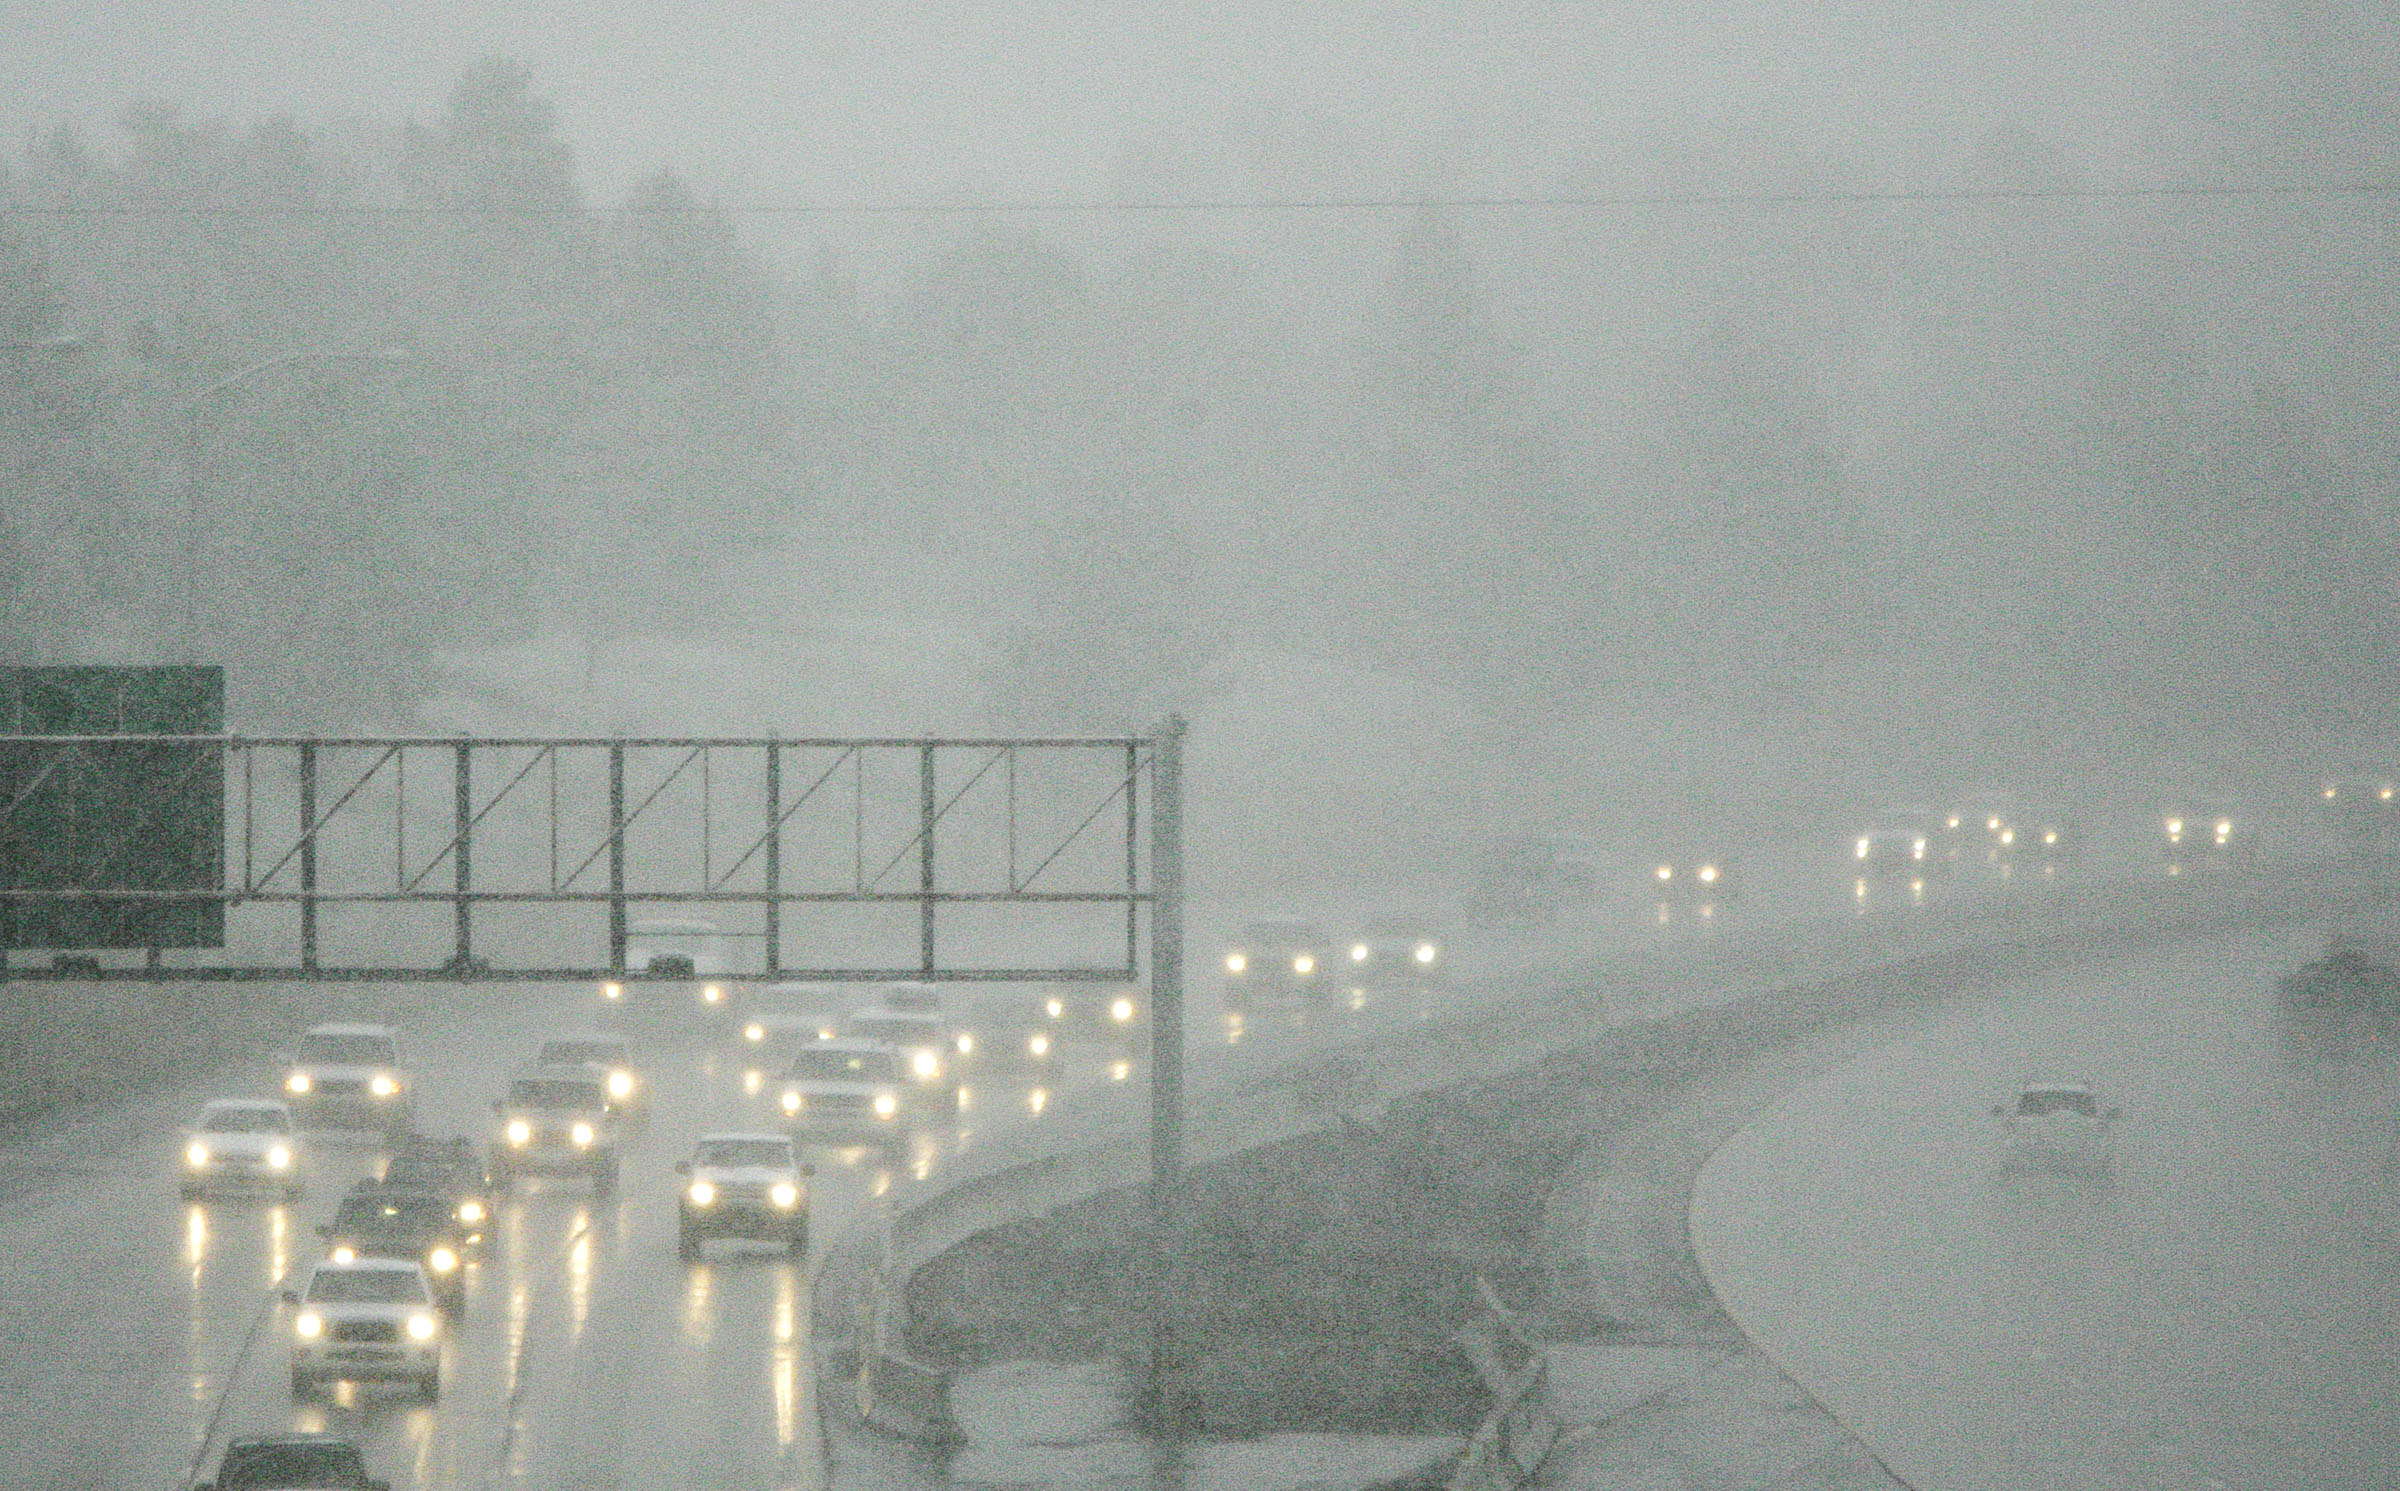 Winter weather conditions on Utah's roads have cause almost 100 car accidents in one day....